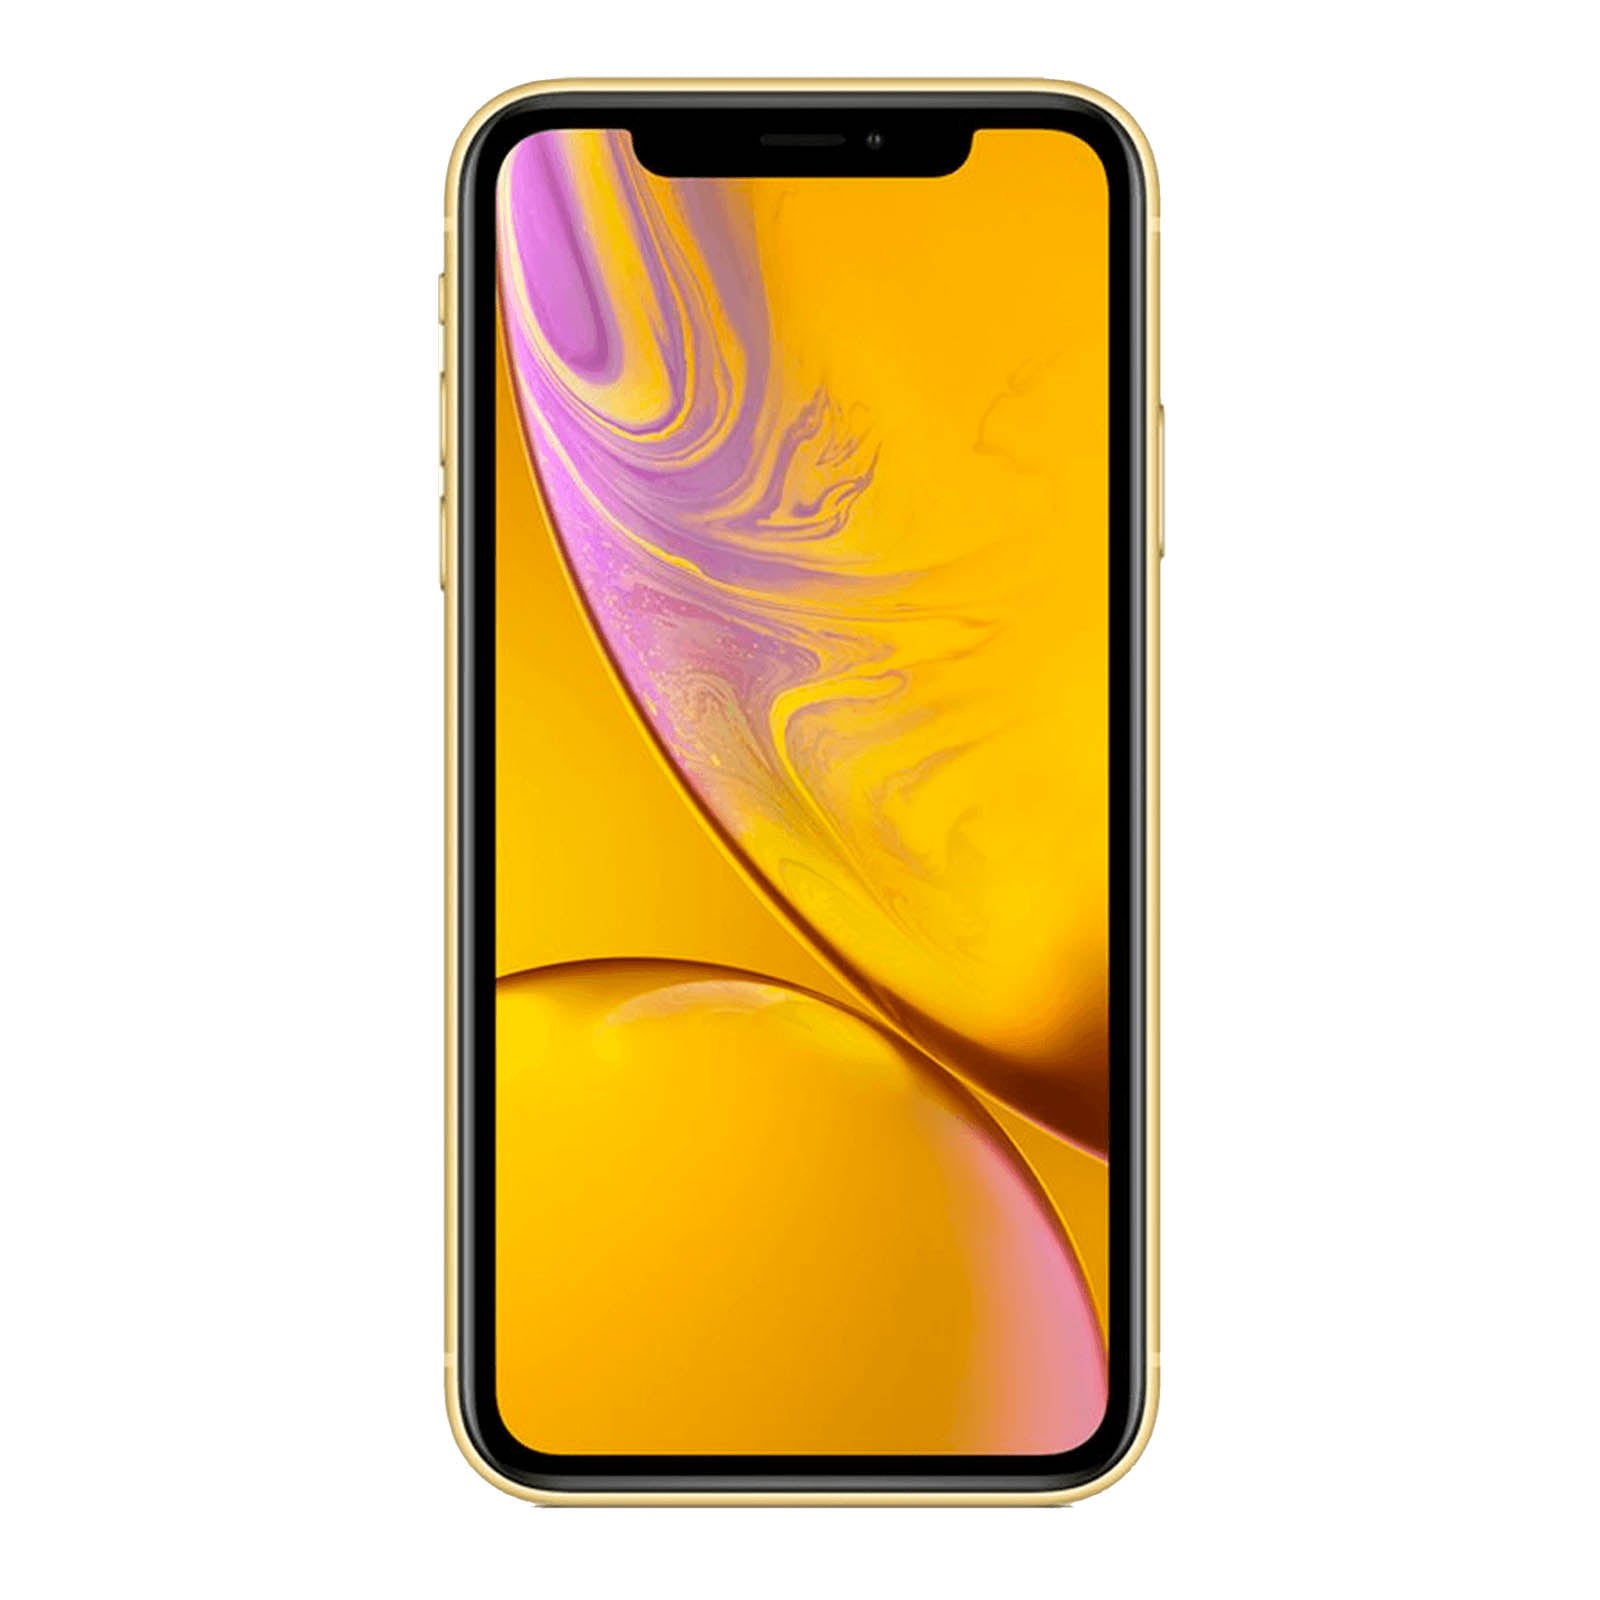 Apple iPhone XR 256GB Yellow Very Good - AT&T